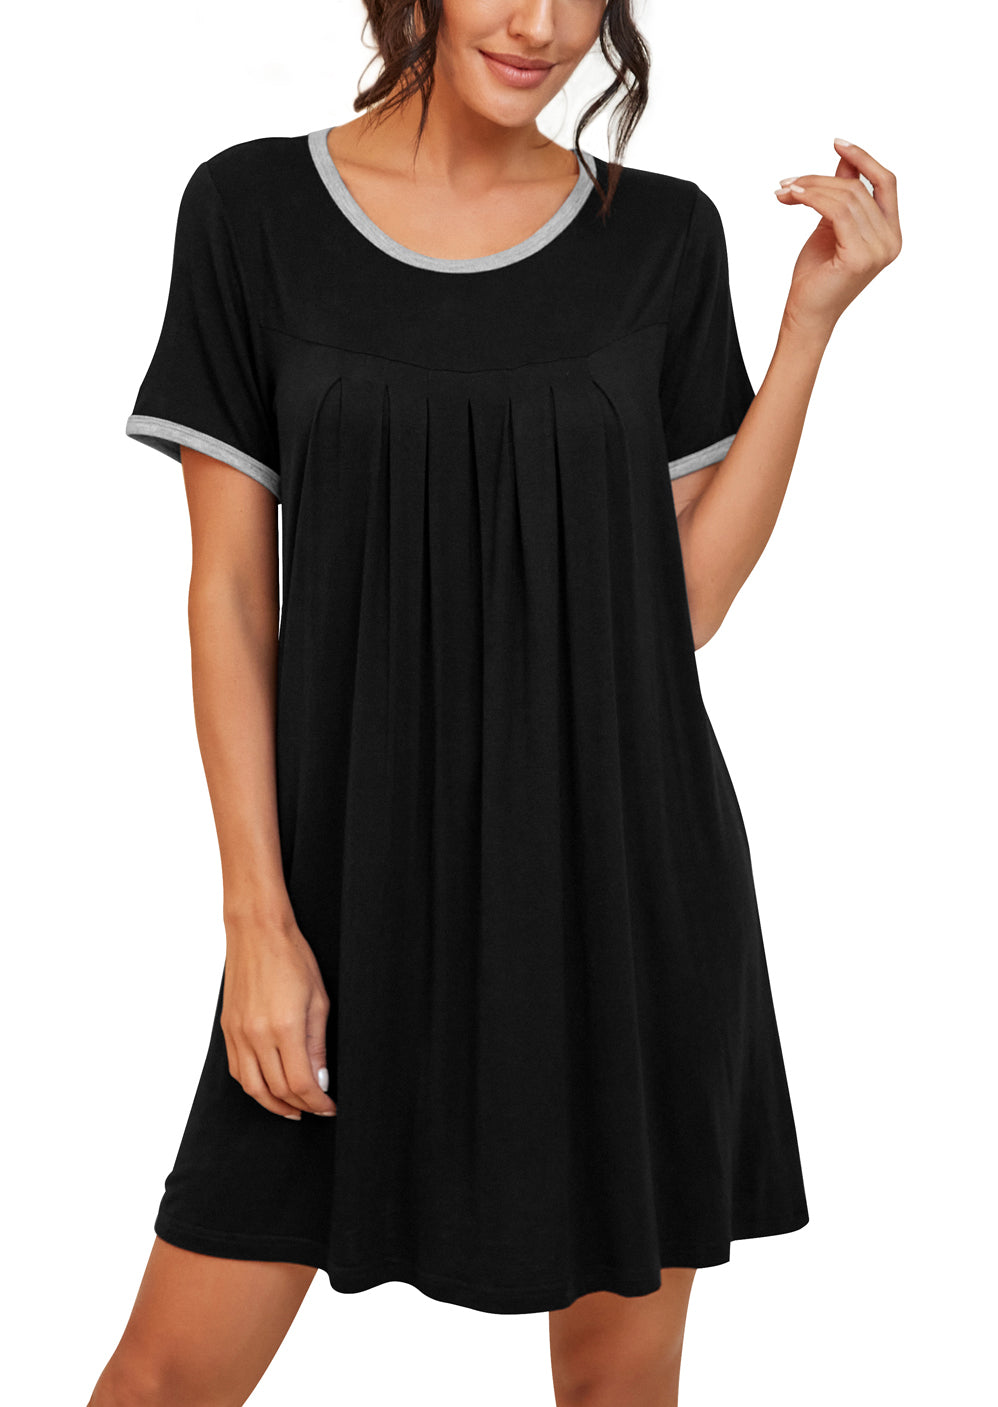  WUJNANG Casual New Night Dress with Chest Pad Women Nightshirt  Soft Nightgown Female Sleepwear Night Wear Dresses,Black-Large : Clothing,  Shoes & Jewelry